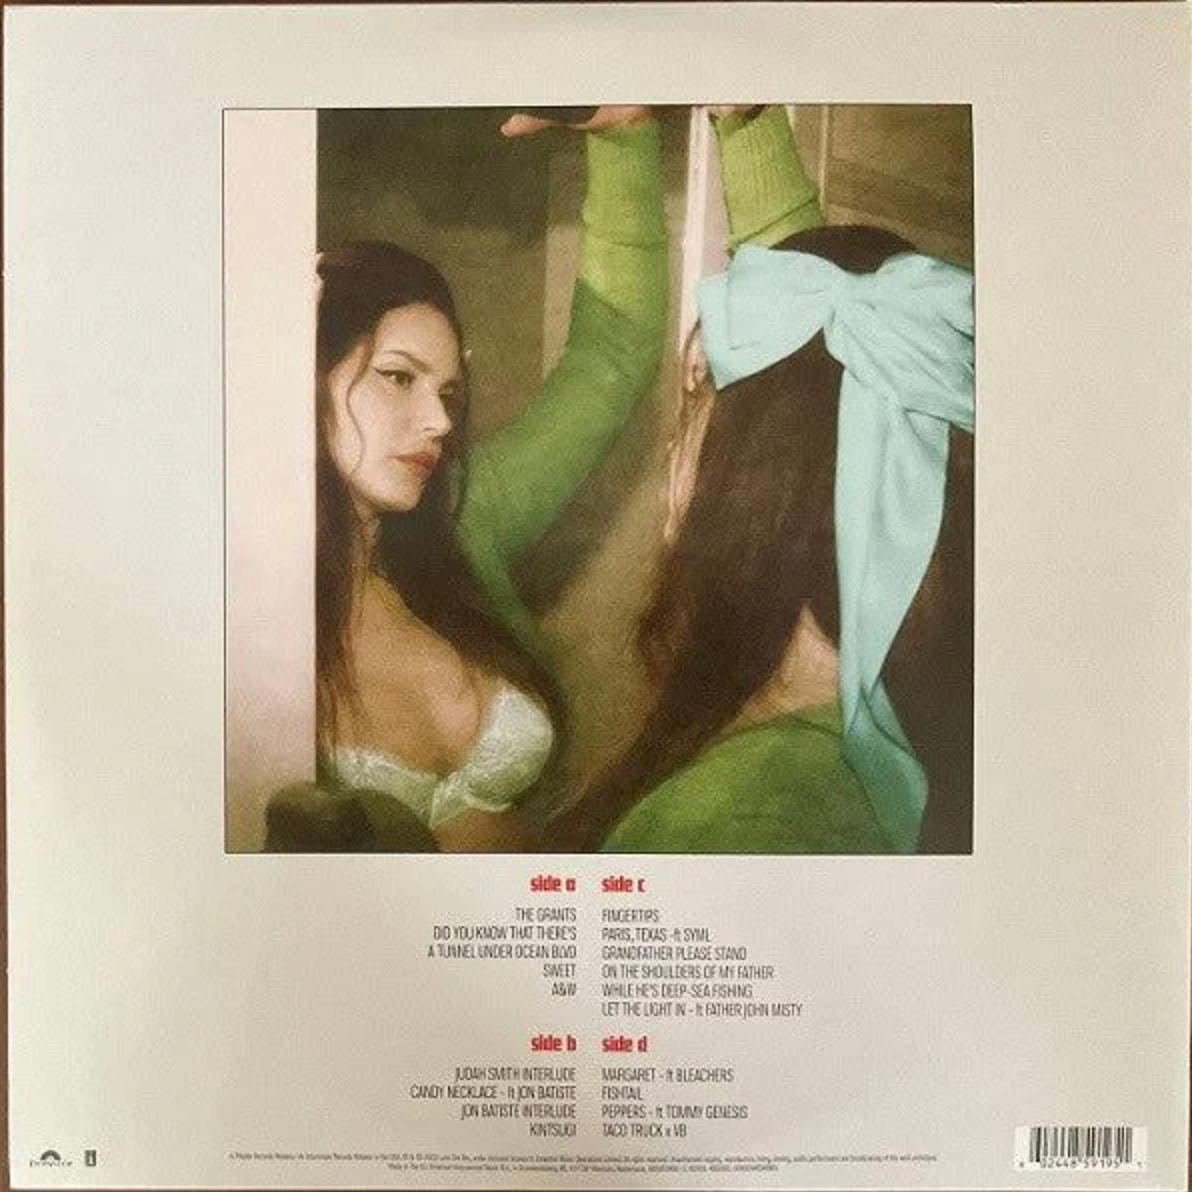 Lana Del Rey - Did You Know...(Limited Edition Urban Outfitters Exclusive)[Damaged]